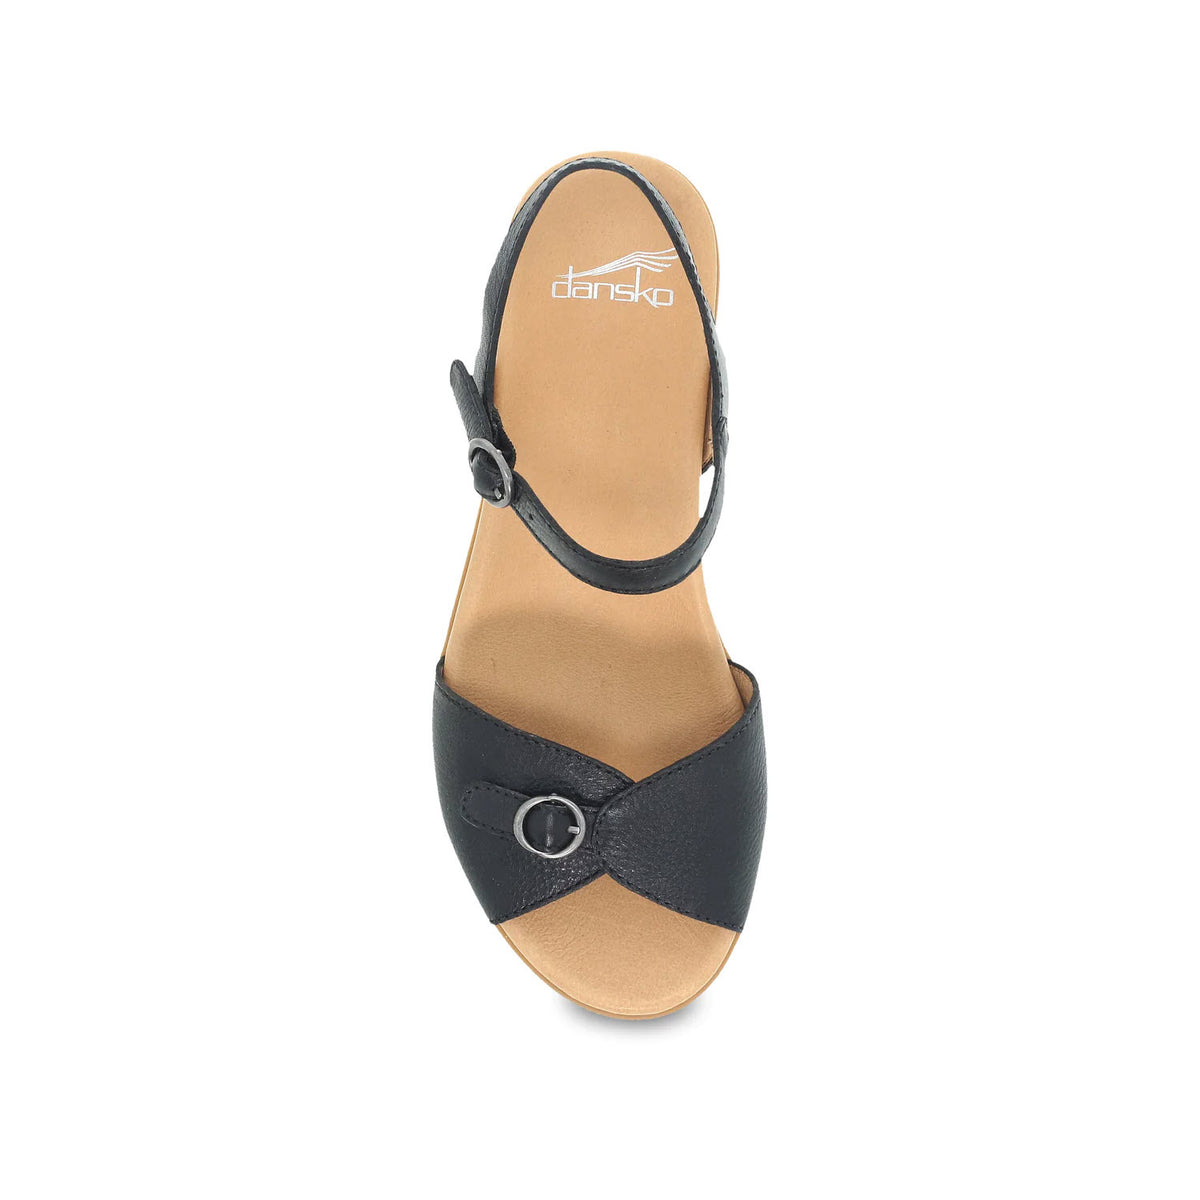 Top view of a Dansko Tessie Black - Womens heeled sandal, featuring a black and tan leather upper with an ankle strap and circular buckle.